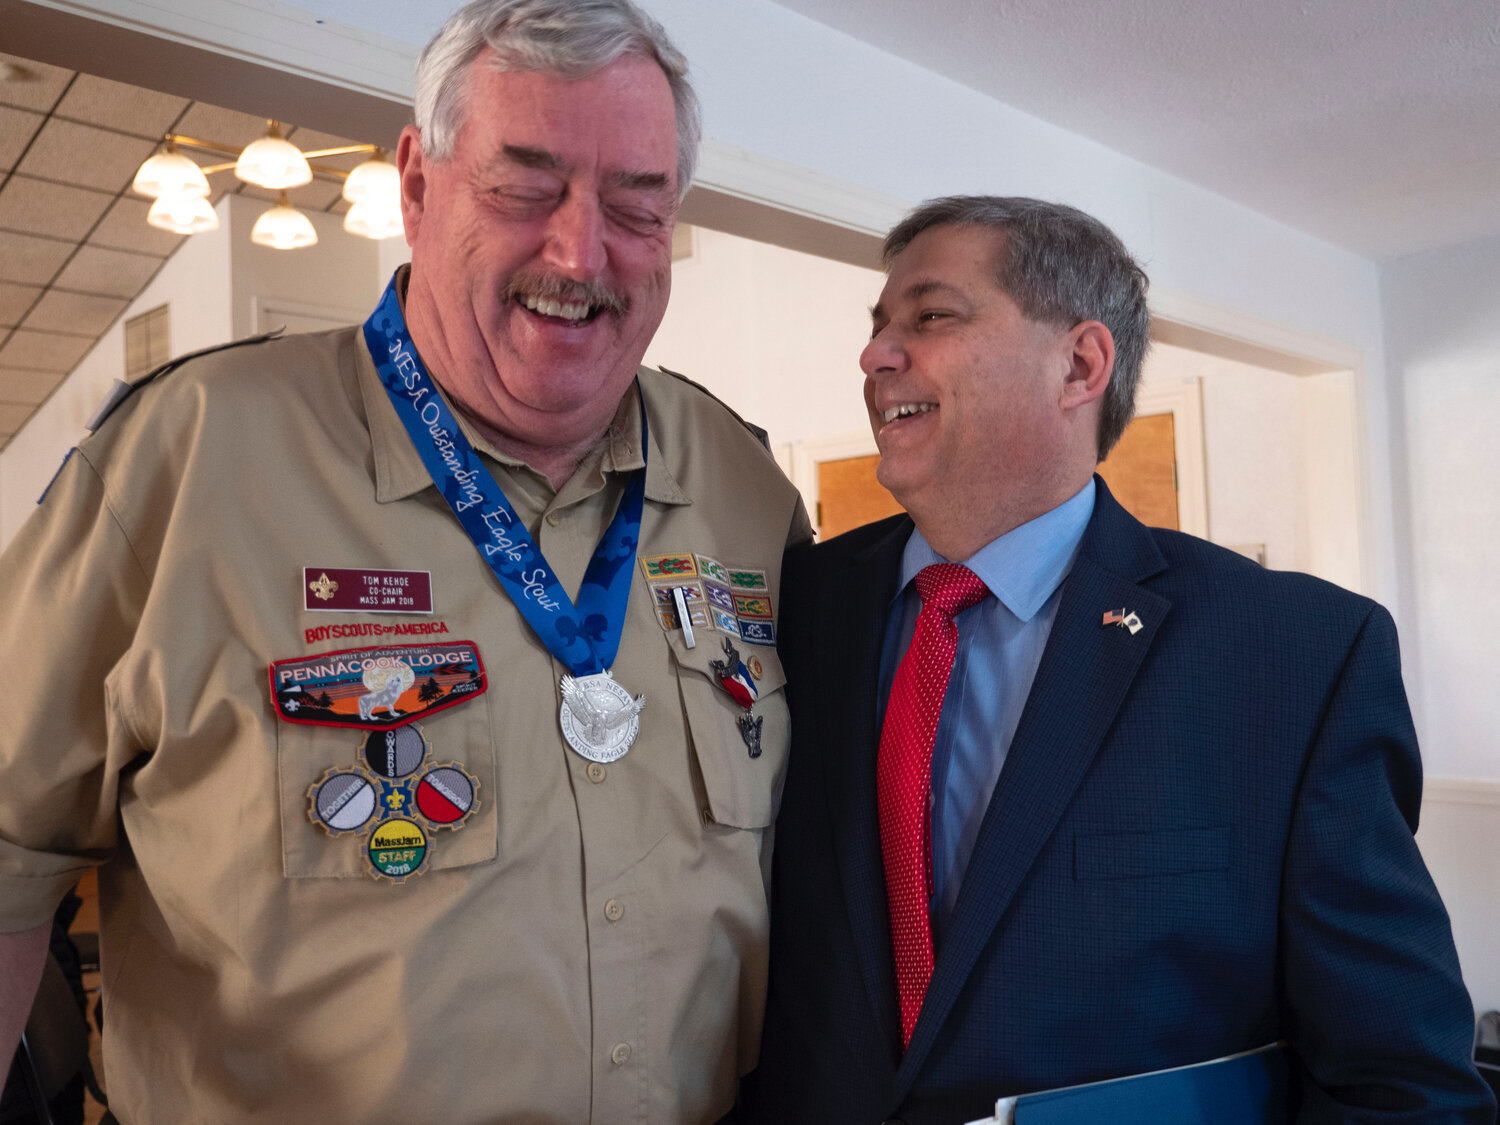 Tom Kehoe, former Manchester Selectman and the oldest living Eagle Scout from Troop3 (1969) jokes with Massachusetts Senate Majority Leader Bruce Tarr.